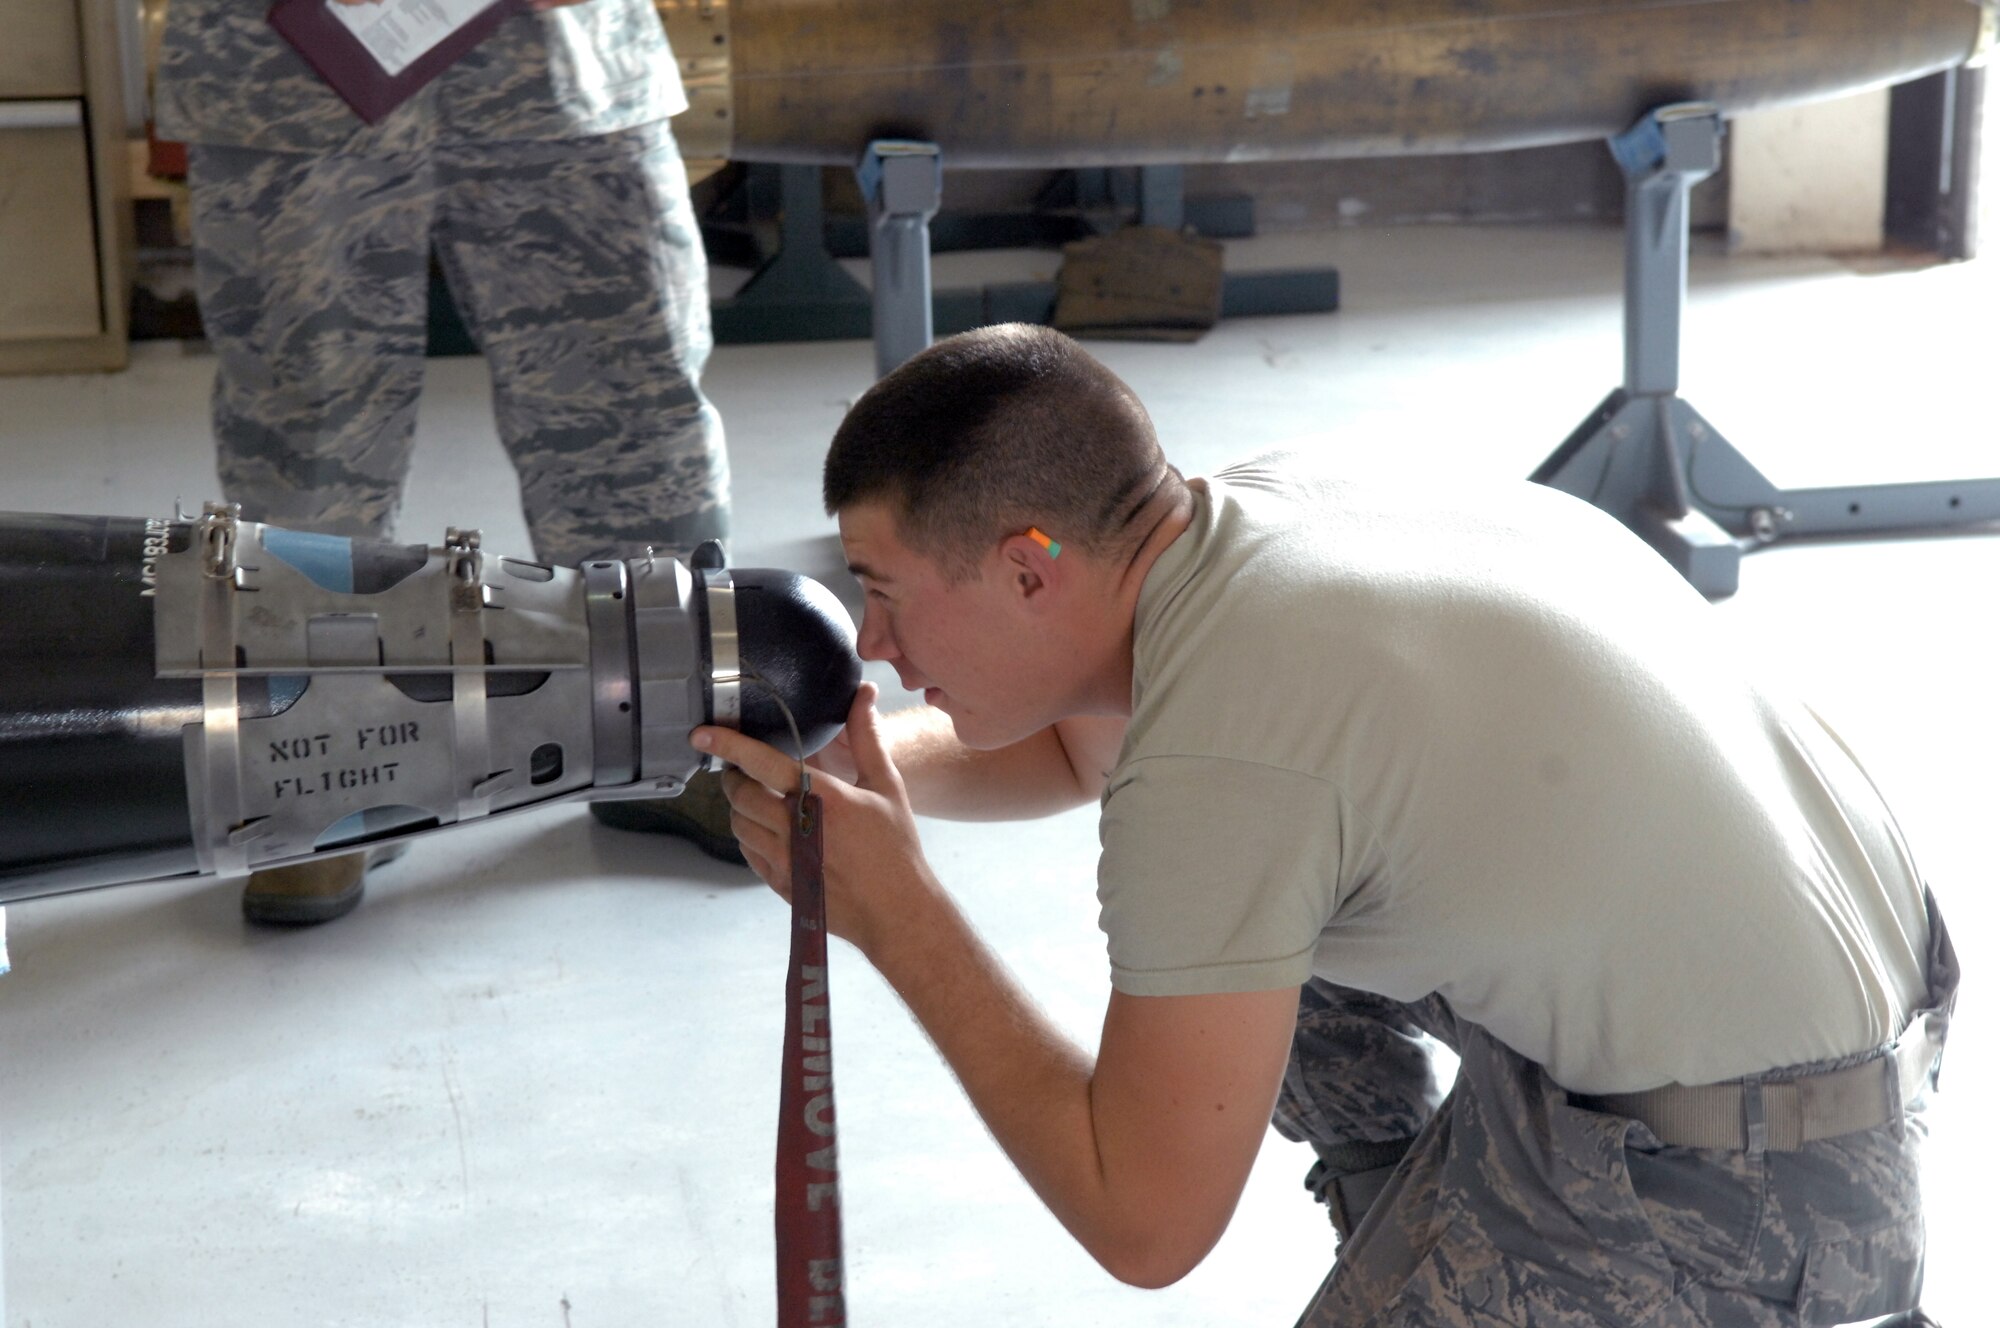 U.S. Air Force Airman 1st Class Dustin Evans, 7th Munitions Squadron load crew member, inspects a GBU-54 during a practice load Aug. 8, 2013, at Dyess Air Force Base, Texas. Load crew members are evaluated and recertified every month to ensure their weapon loading skills remain precise and up to Air Force standards. (U.S. Air Force photo by Senior Airman Shannon Hall/Released)